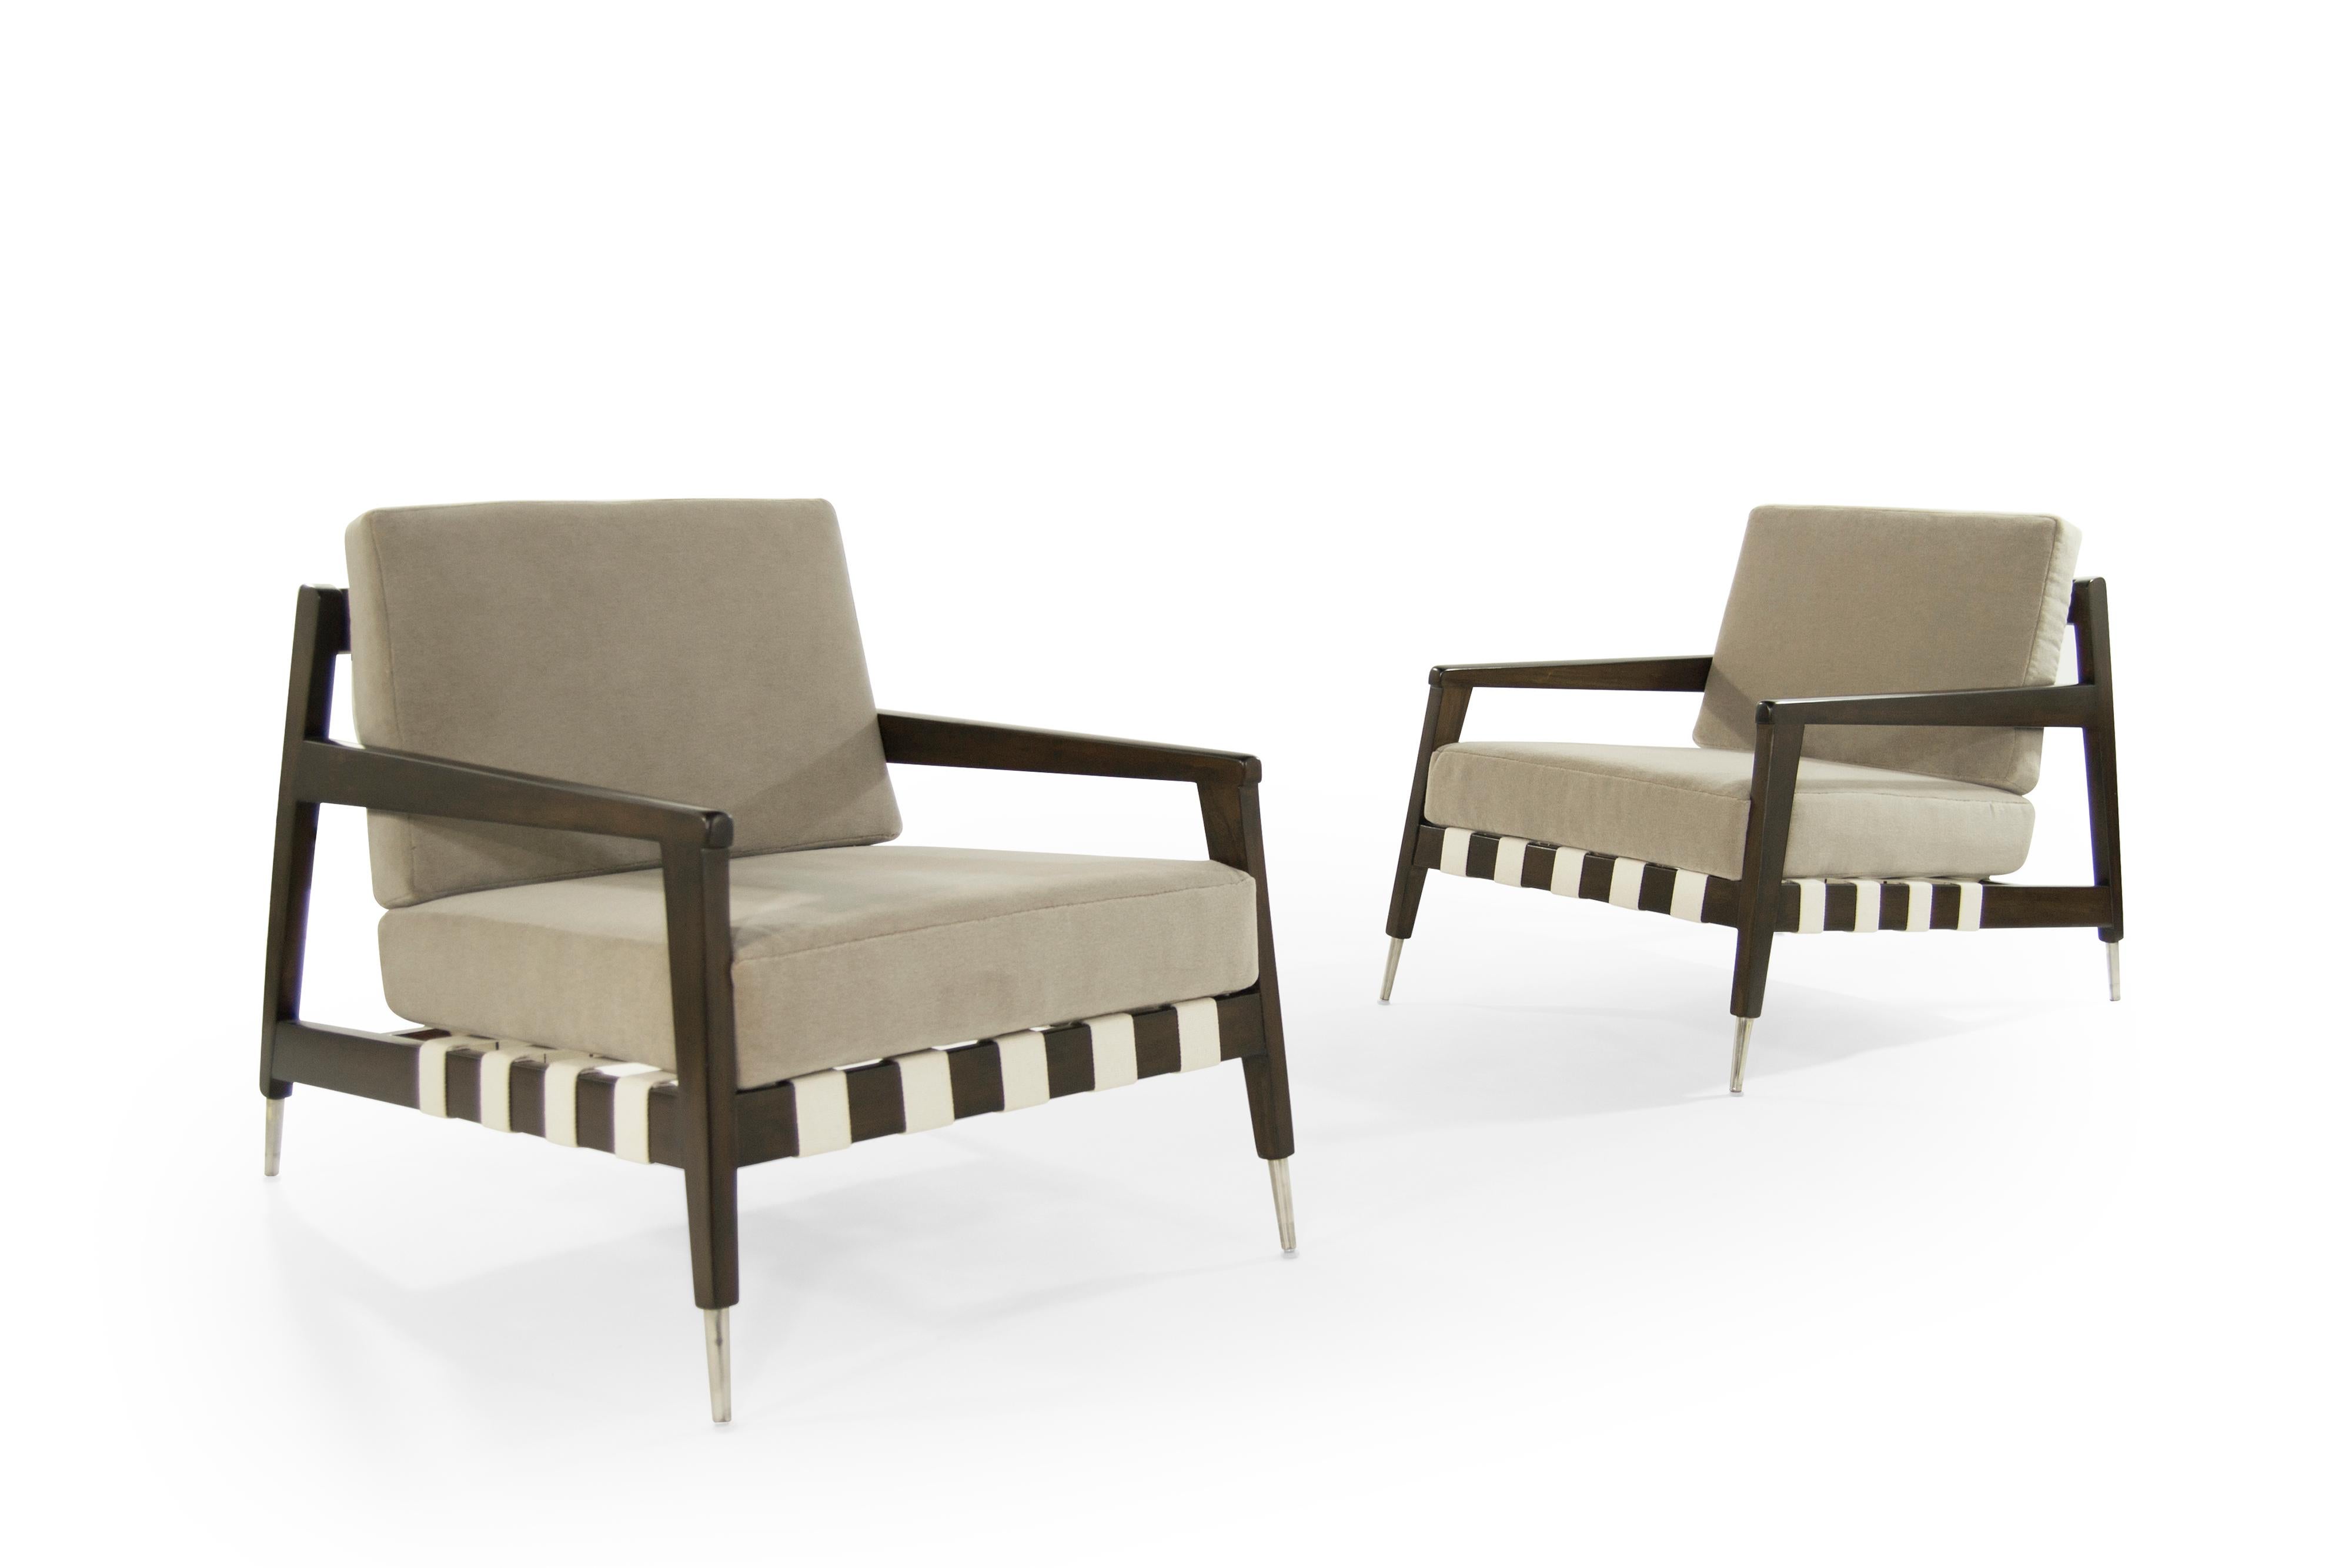 20th Century Rare Edmond Spence Strapped Lounge Chairs